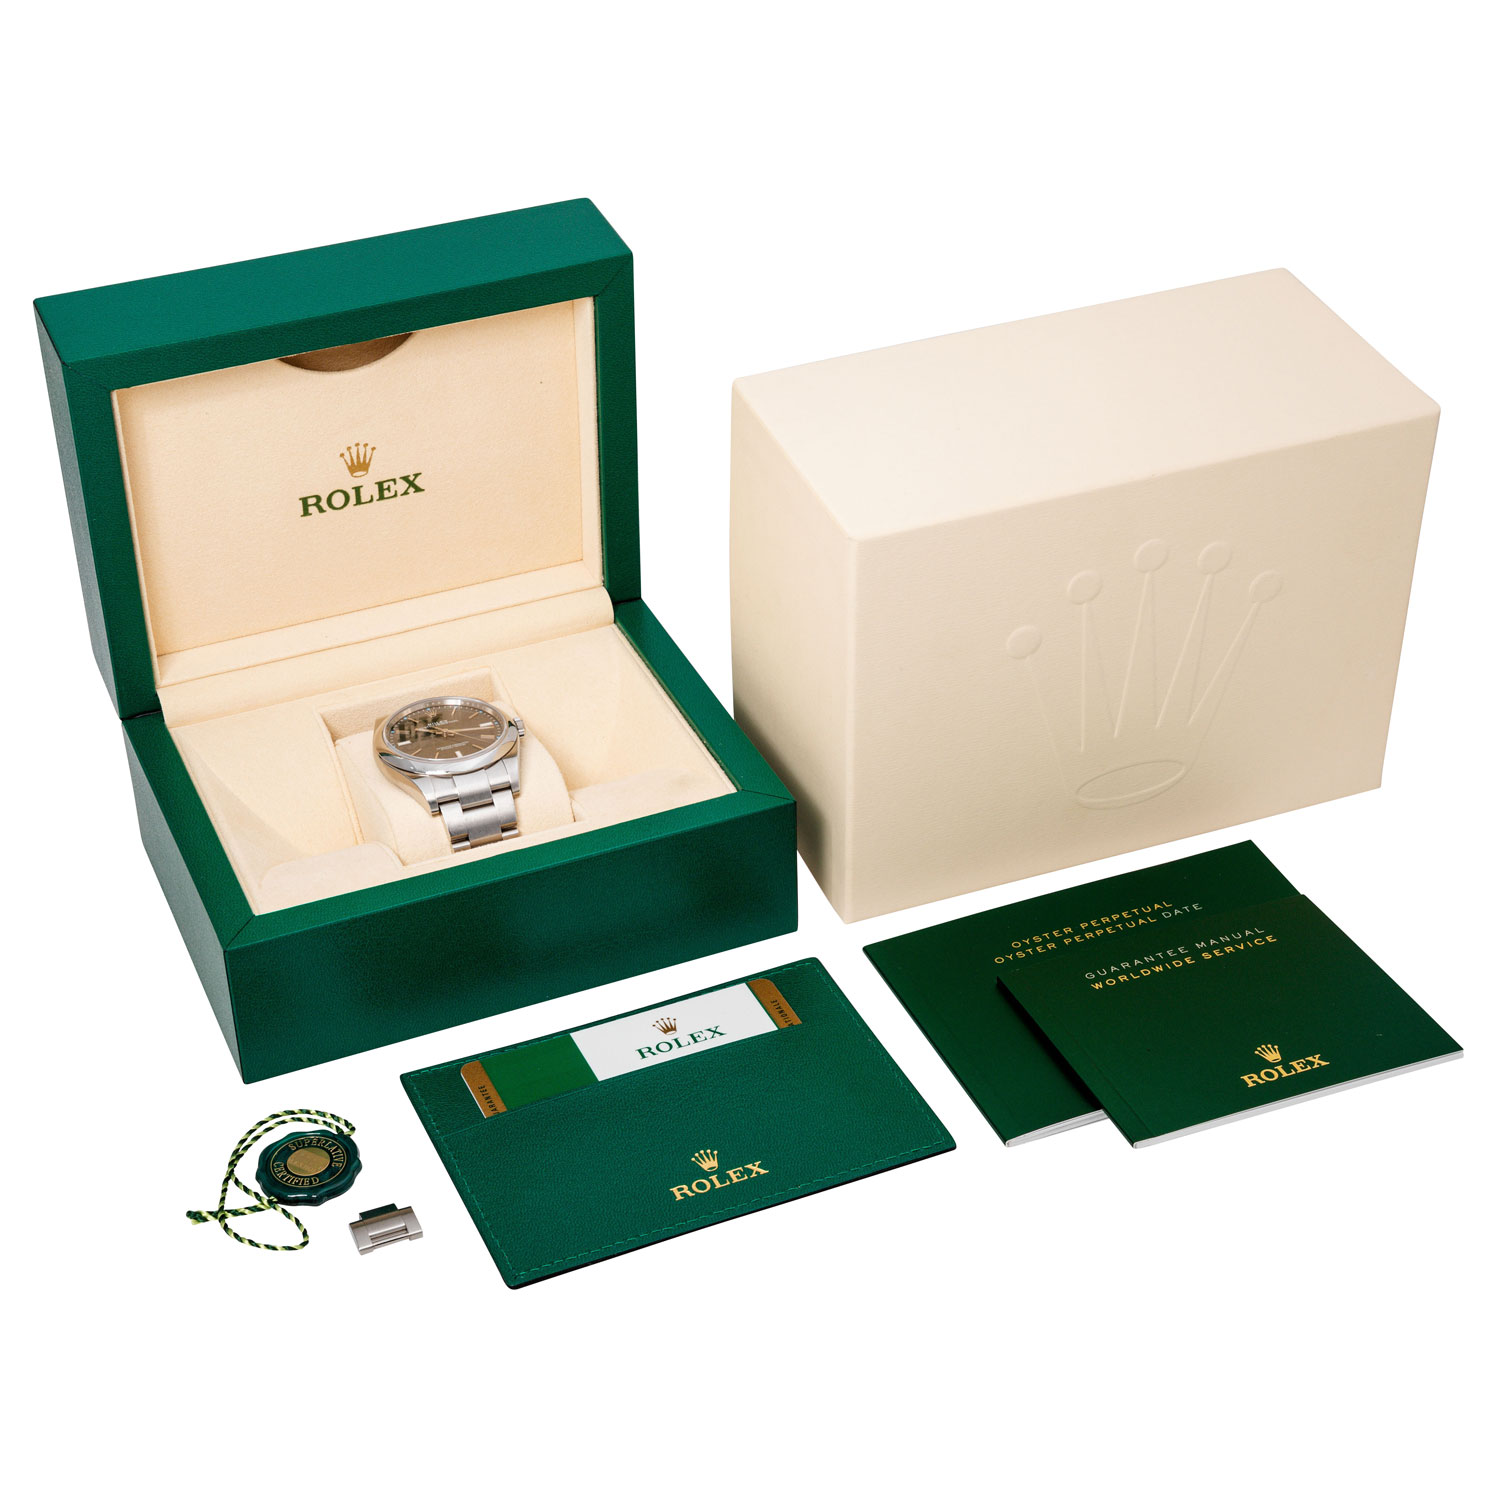 PFANDAUKTION - ROLEX Oyster Perpetual - Image 8 of 8